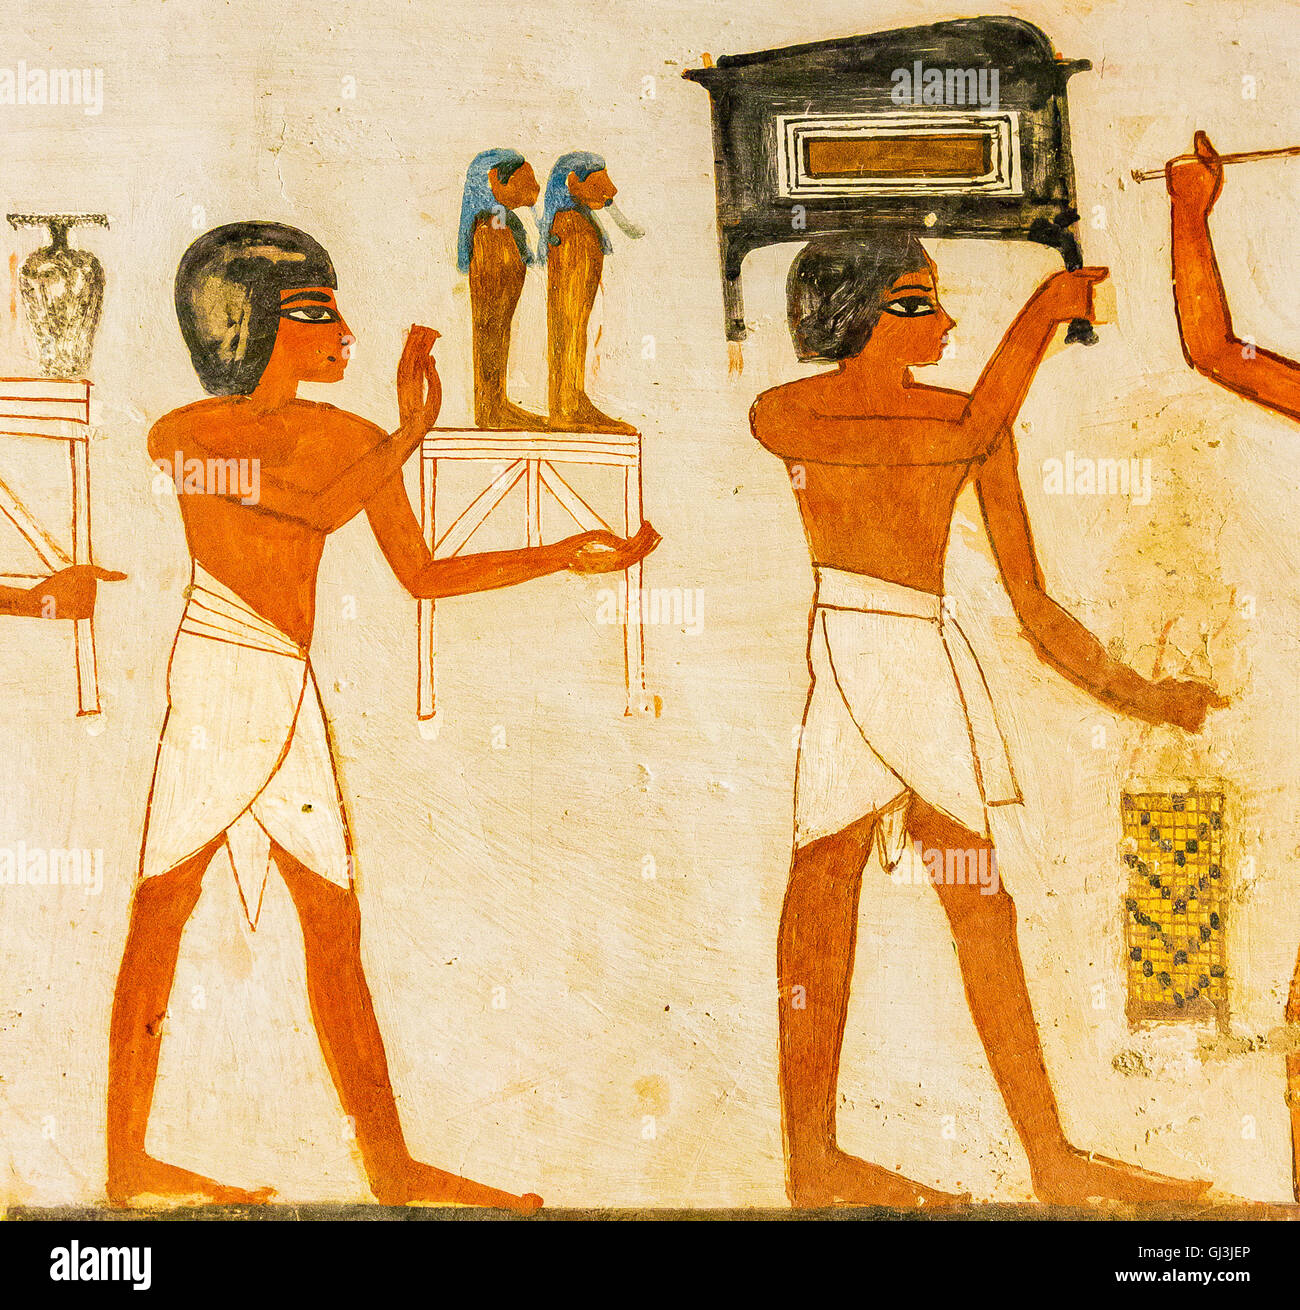 Thebes in Egypt, Valley of the Nobles, tomb of Menna. Funeral procession, men bringing objects to the tomb. Stock Photo